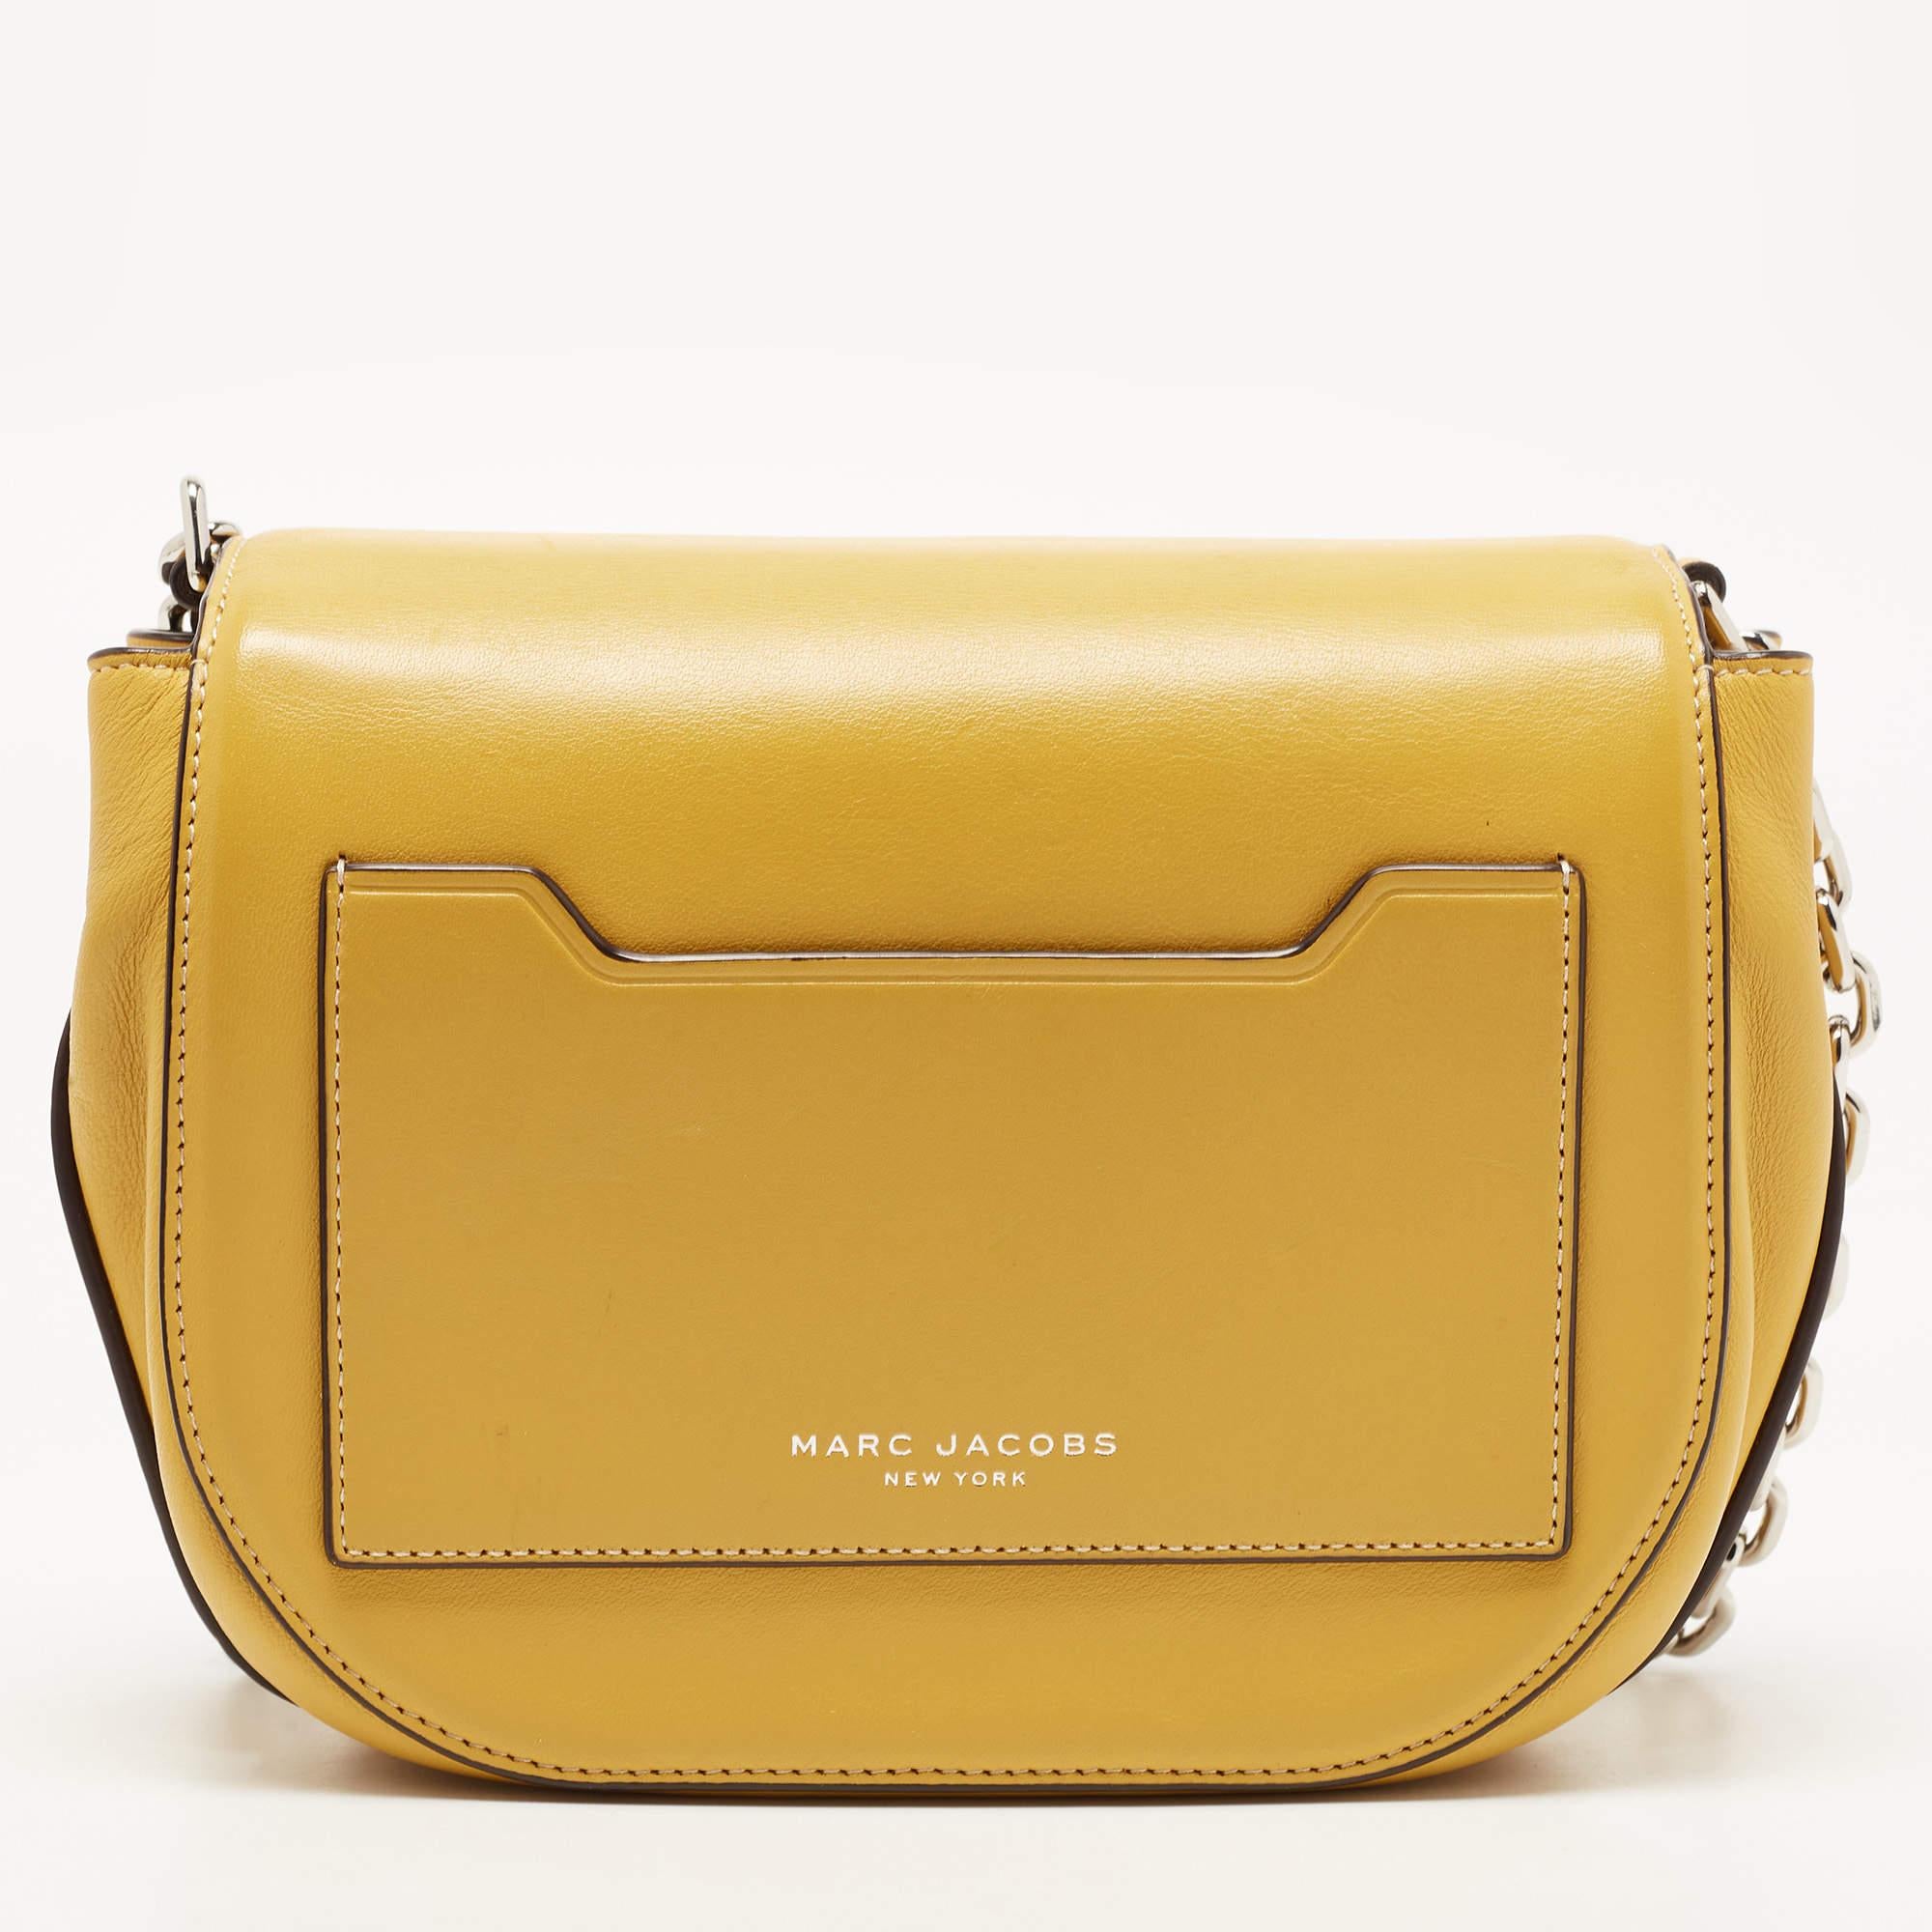 Marc Jacobs Yellow Leather West End The Jane Saddle Shoulder Bag 10